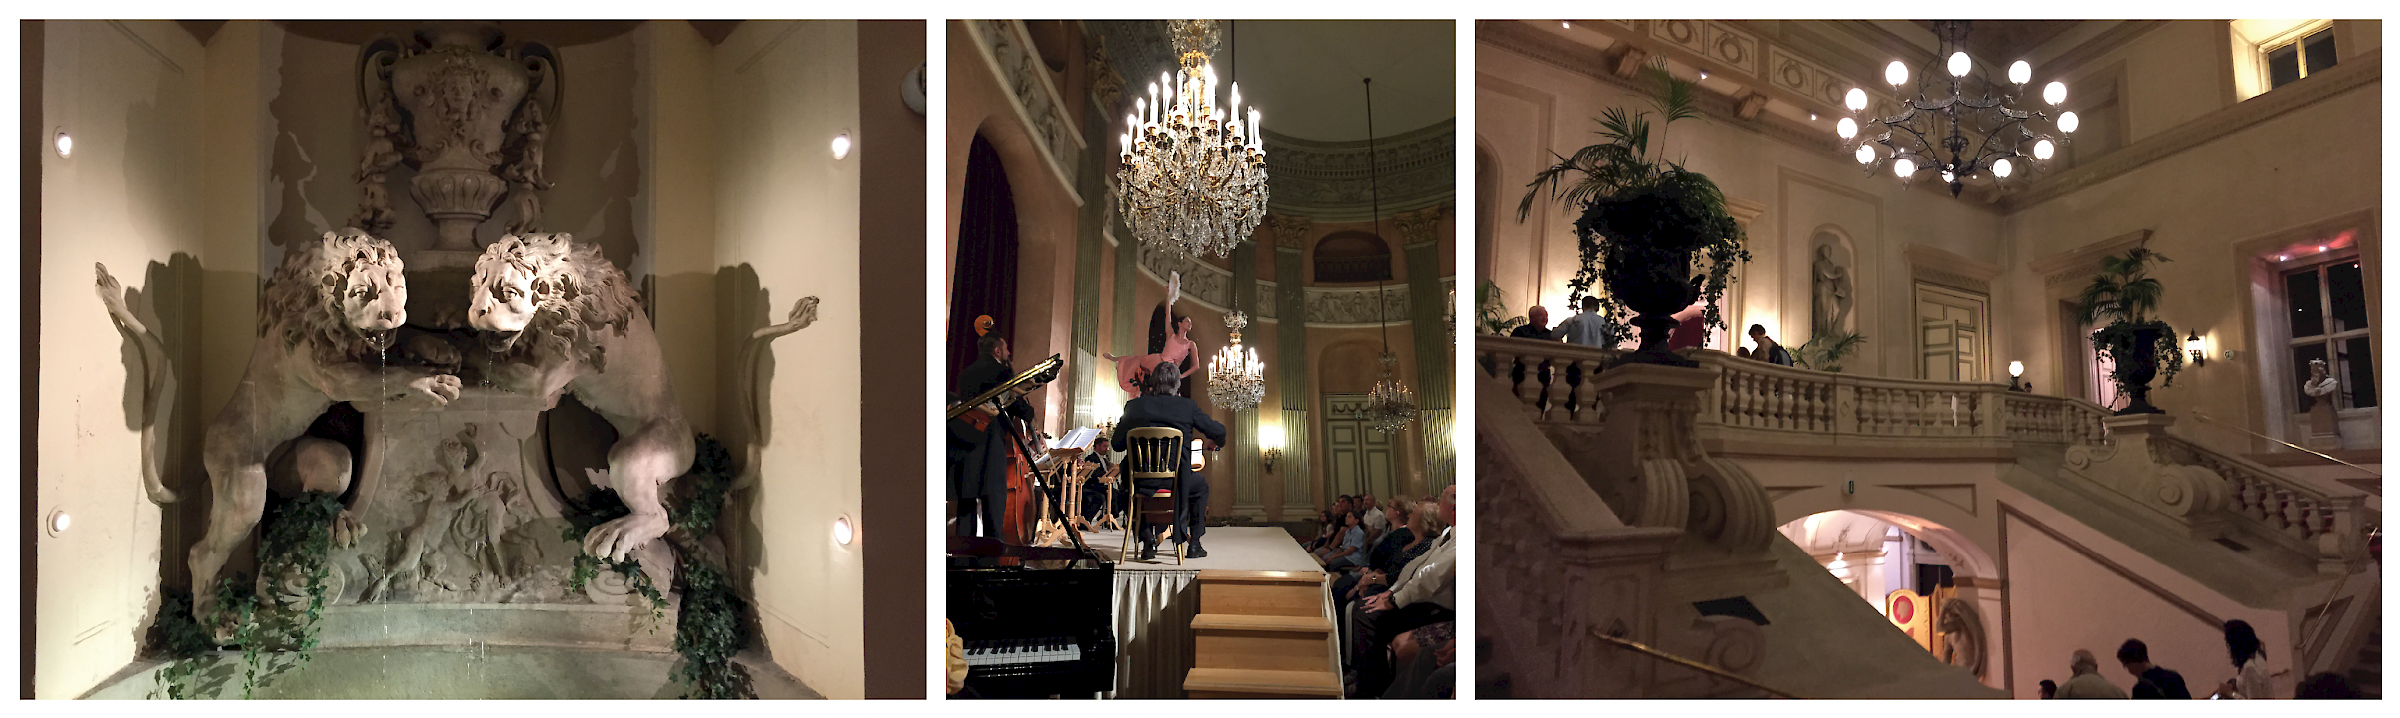 Classic Waltz and Operetta Concert at the Viennese Palais